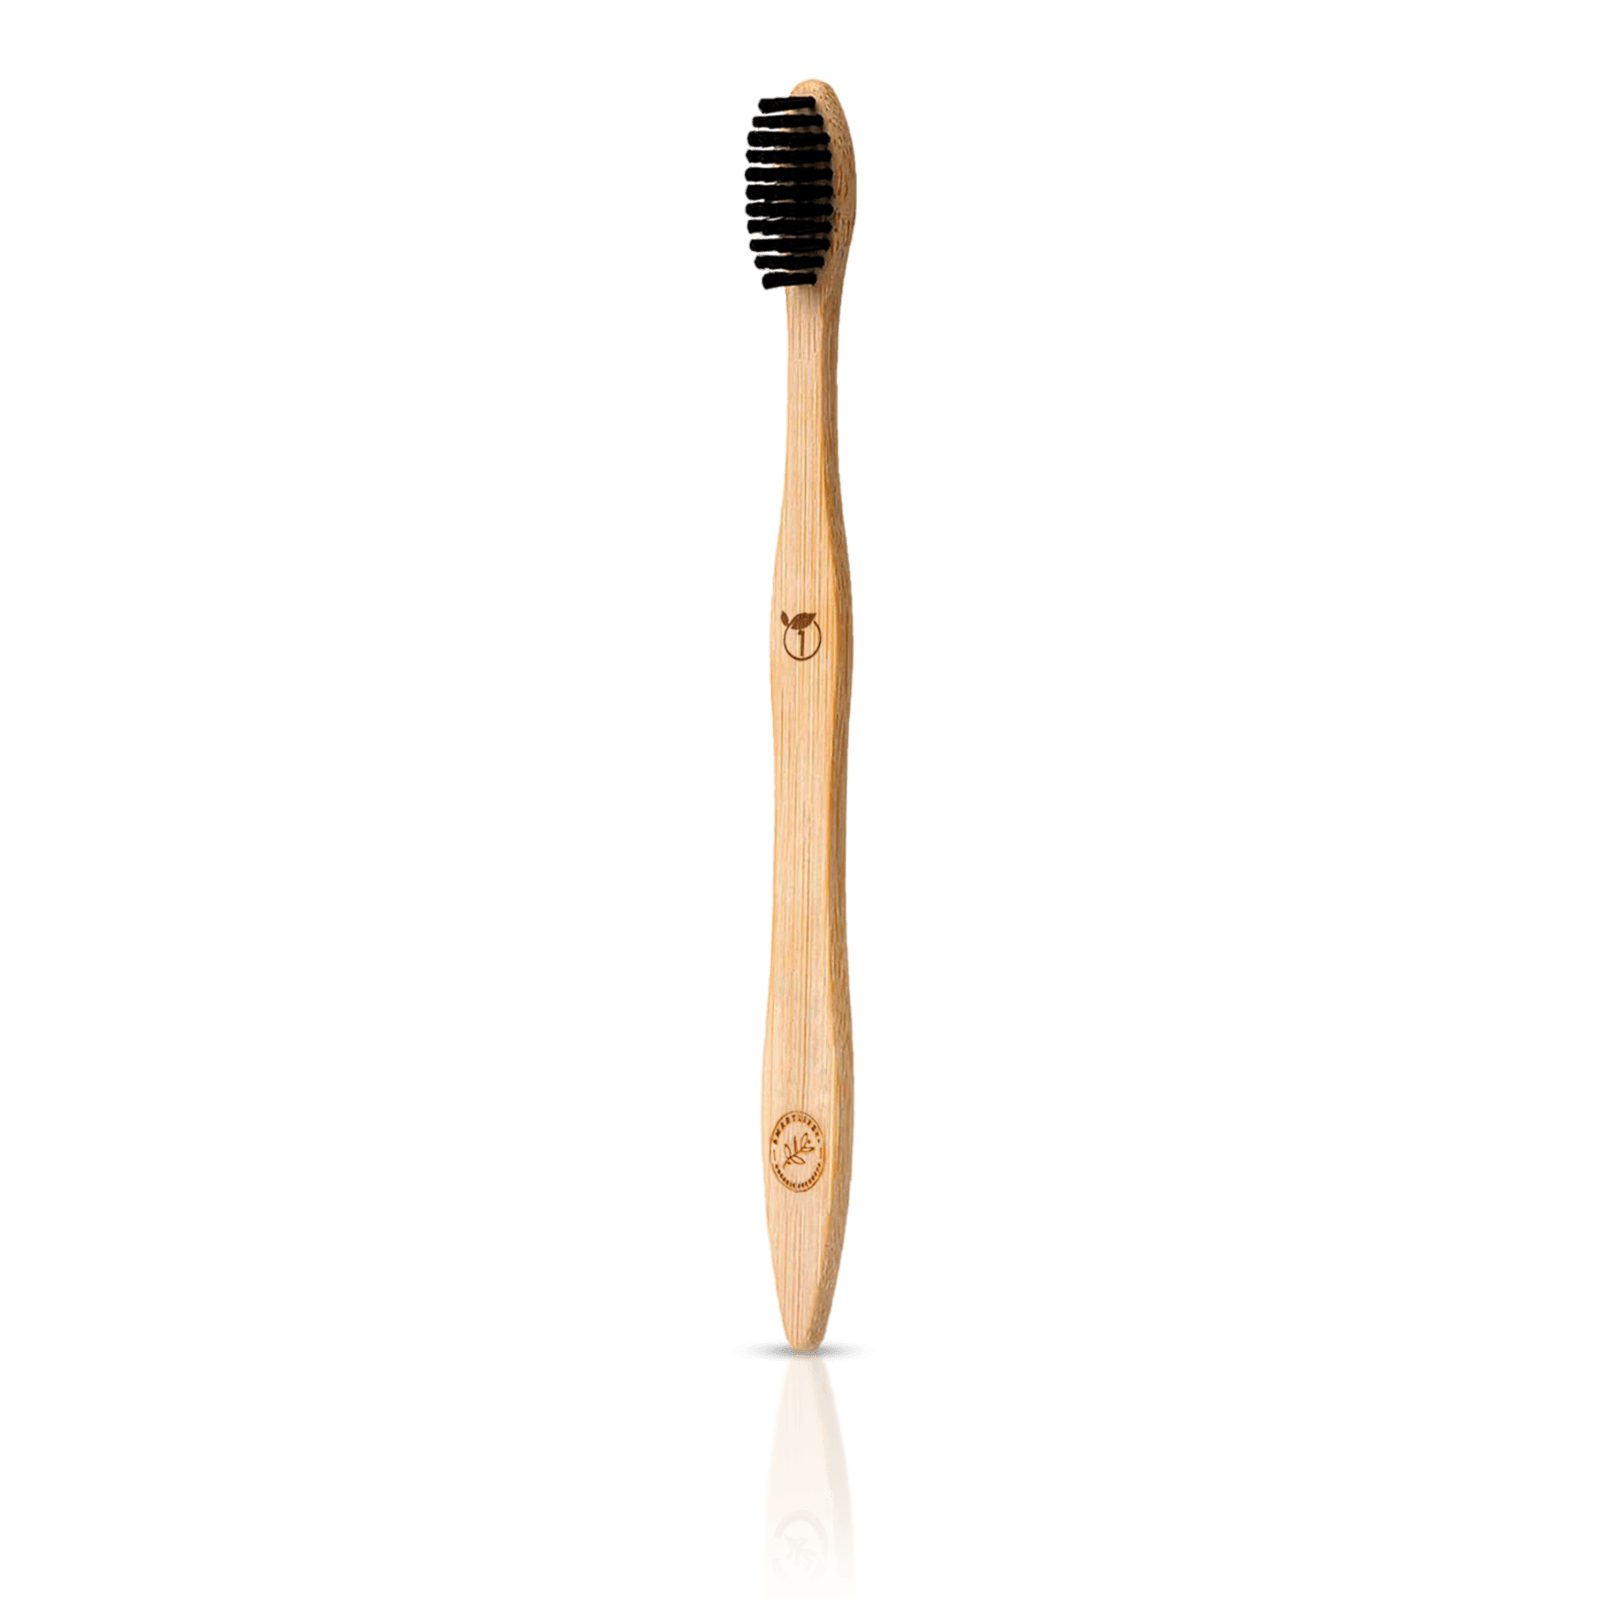 Eco-Friendly Oral Care: Switch to Bamboo Toothbrushes Today!